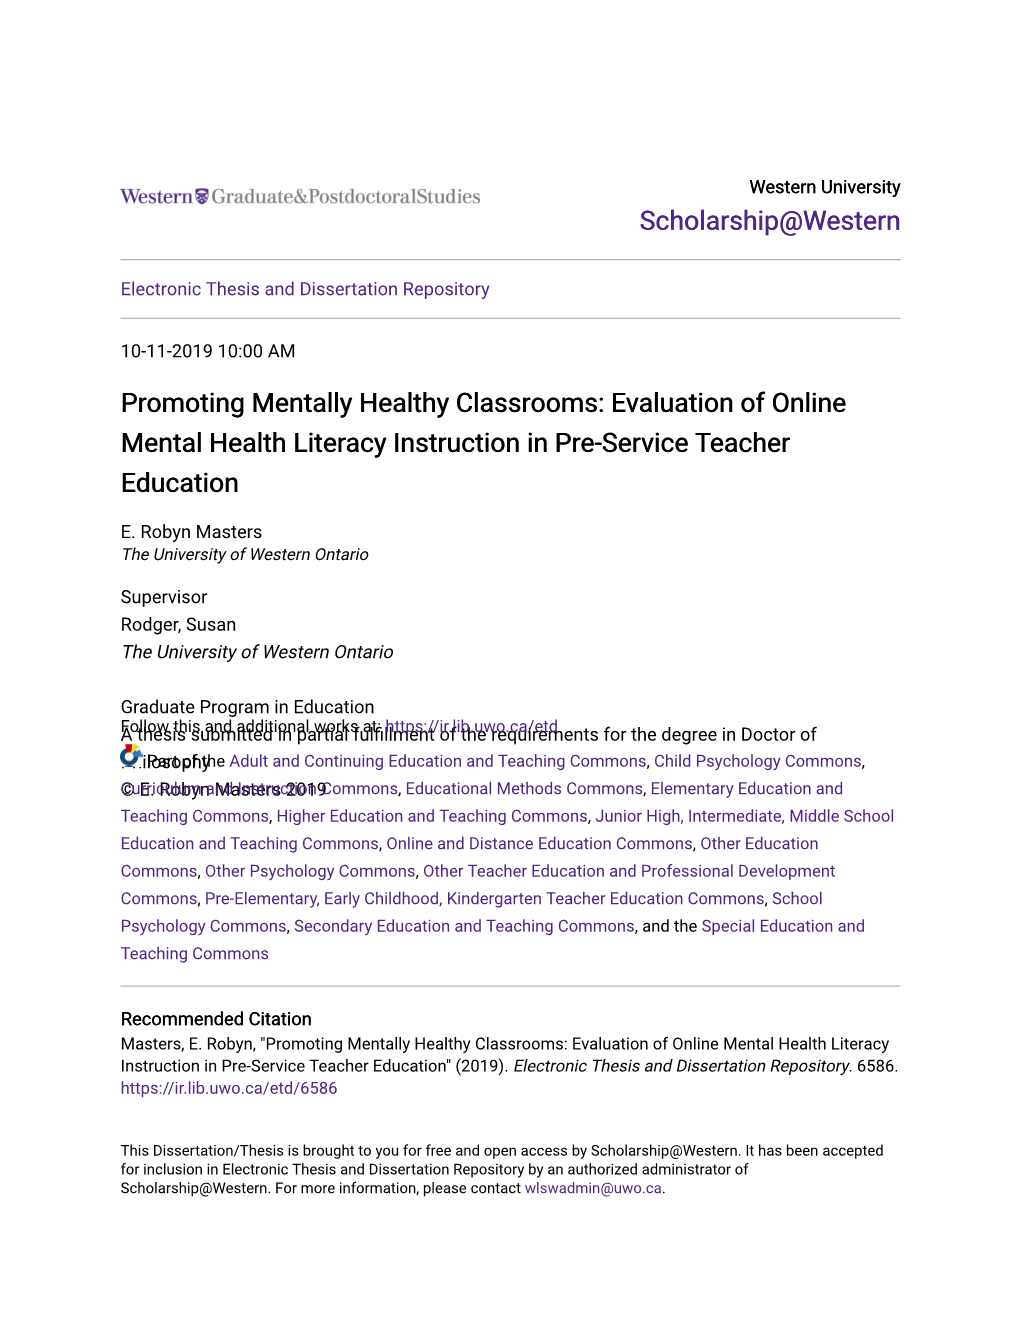 Evaluation of Online Mental Health Literacy Instruction in Pre-Service Teacher Education